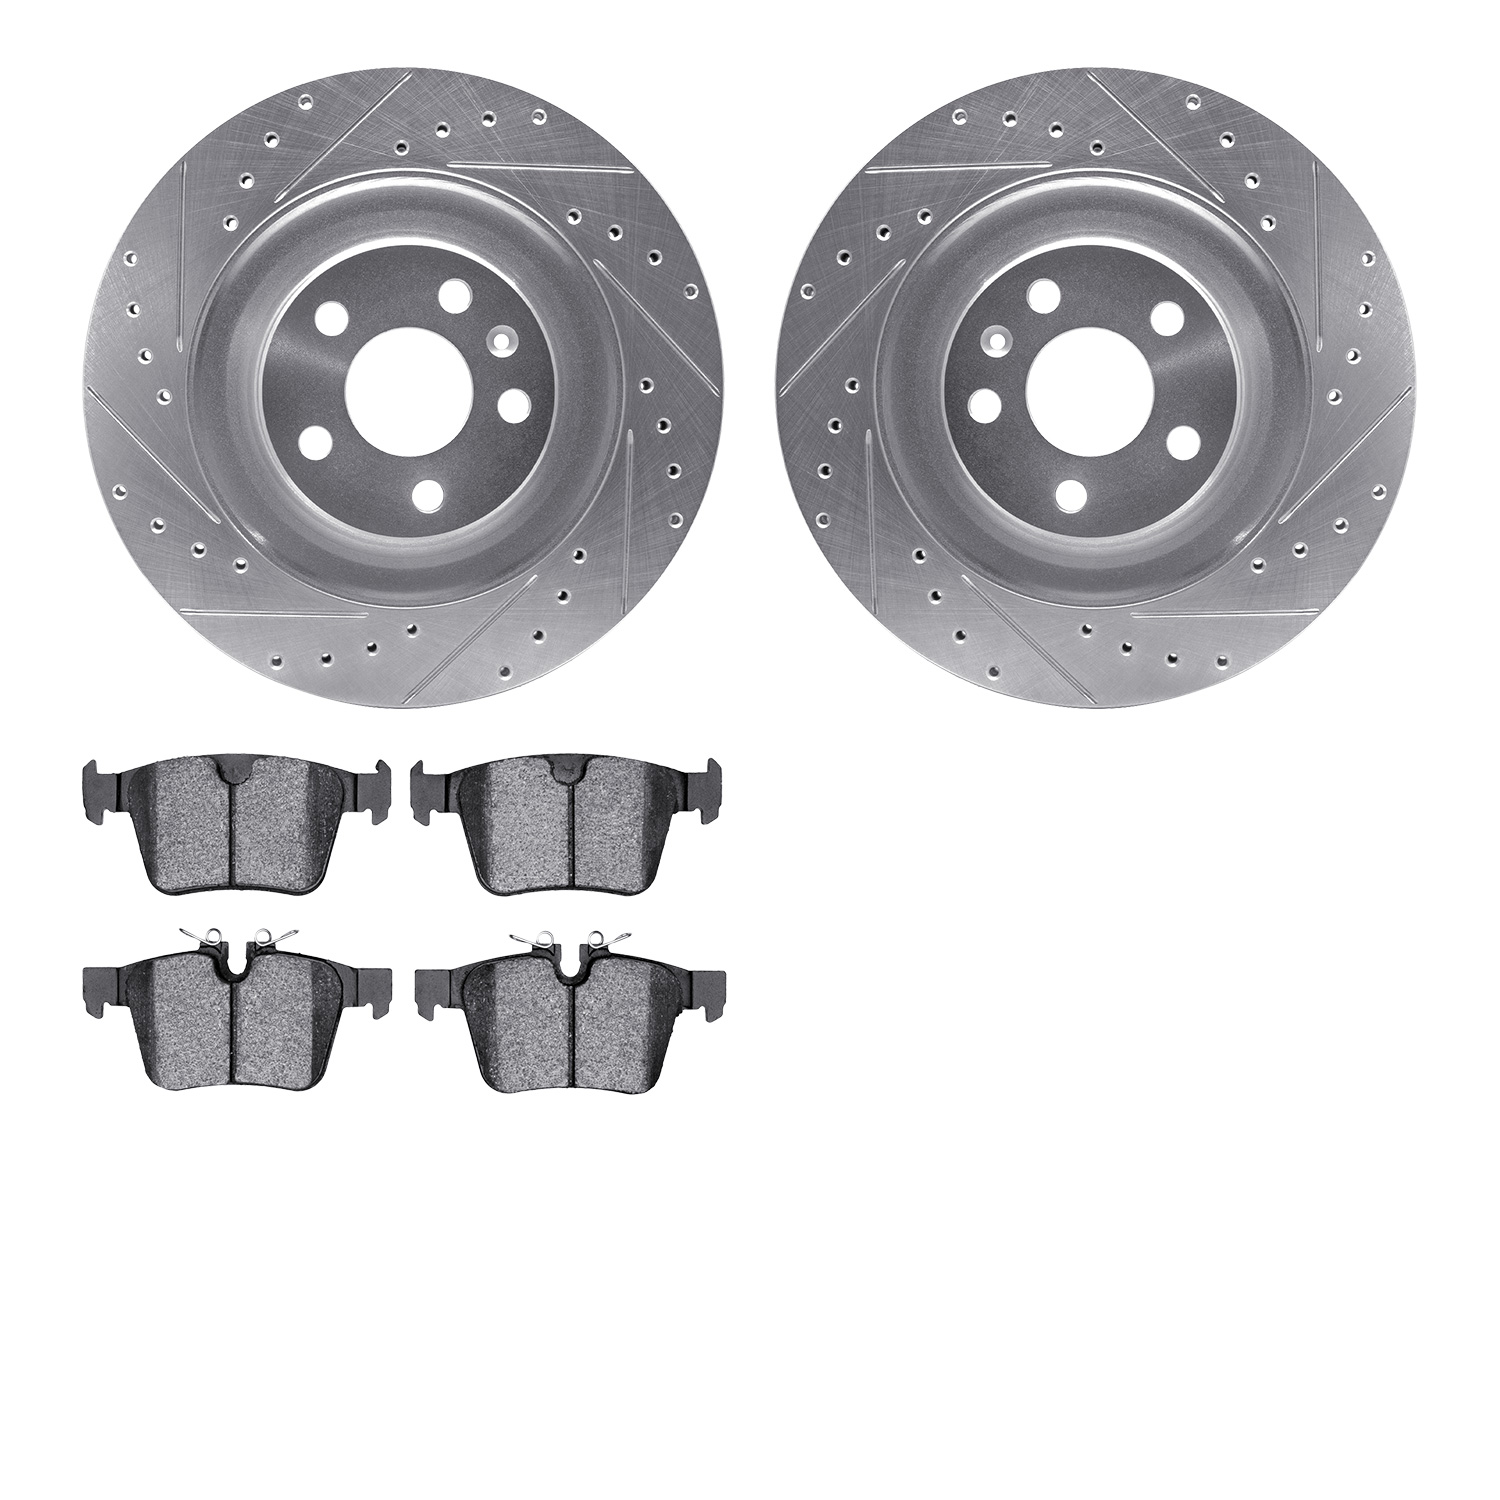 7502-27305 Drilled/Slotted Brake Rotors w/5000 Advanced Brake Pads Kit [Silver], Fits Select Multiple Makes/Models, Position: Re